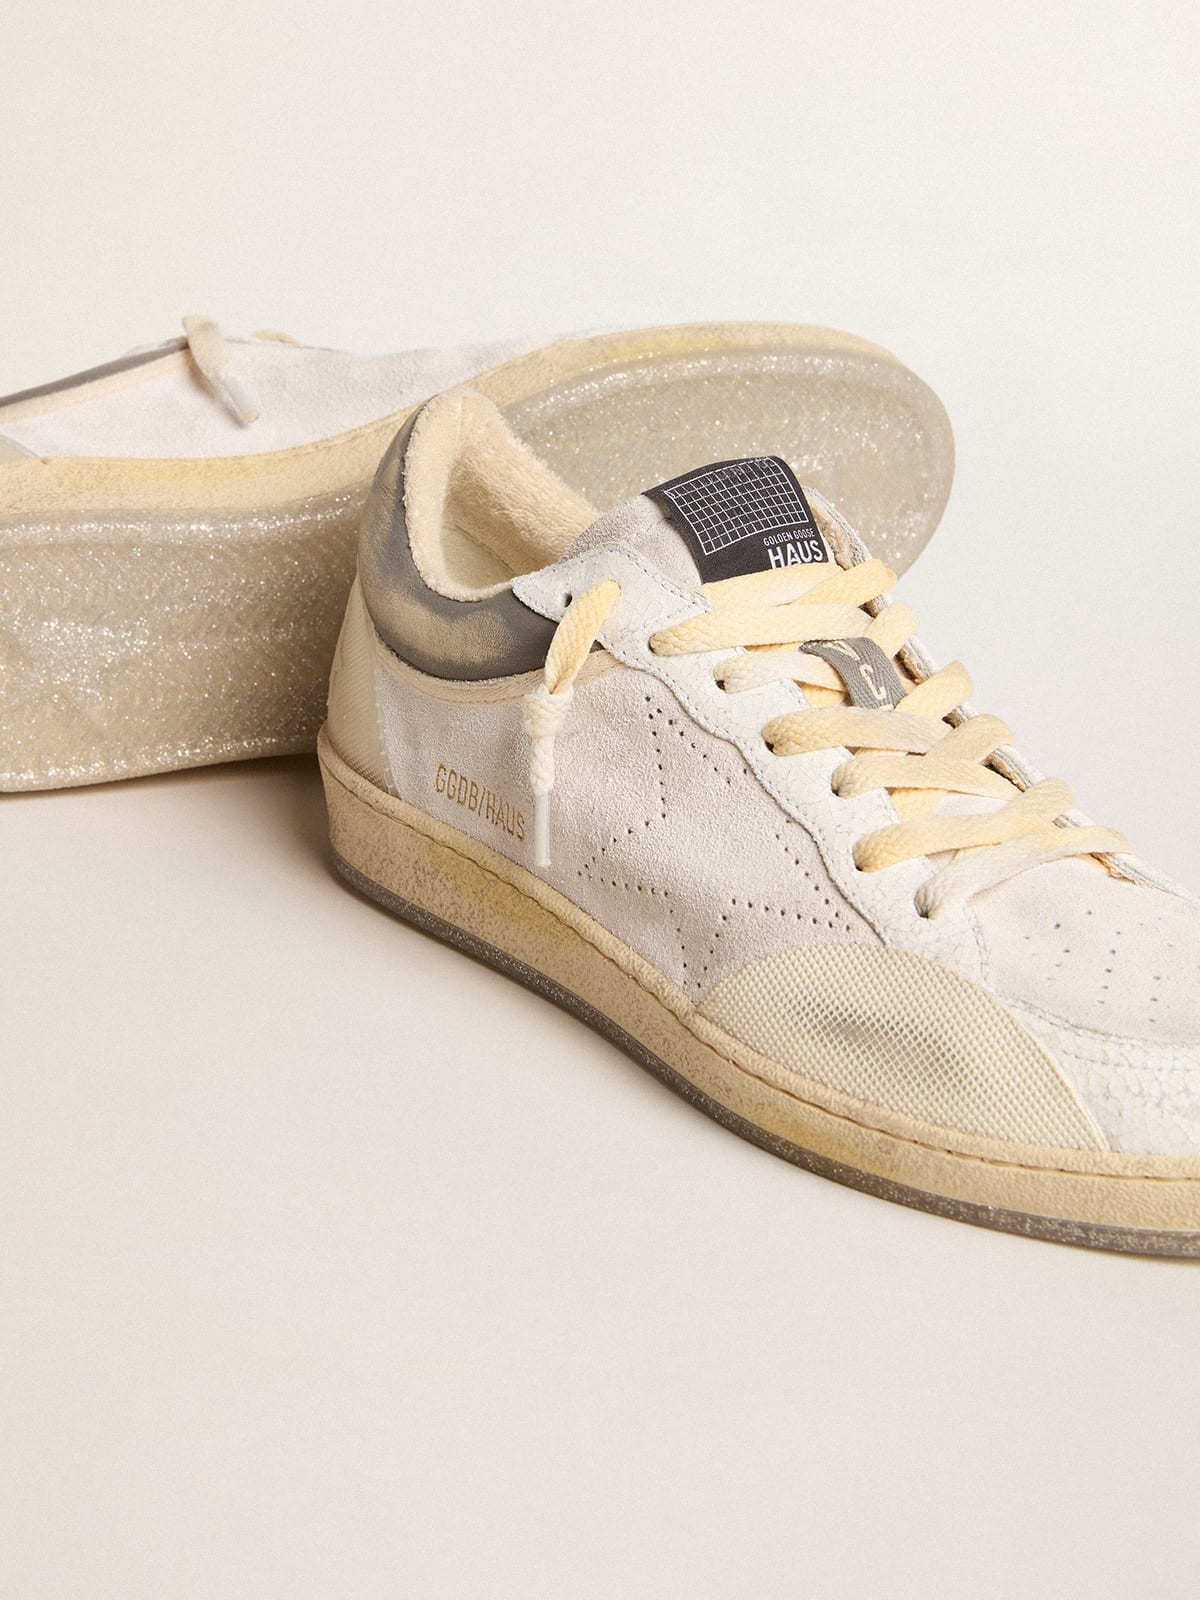 Golden Goose - Men’s Ball Star Pro in optical white leather with rubber inserts in 